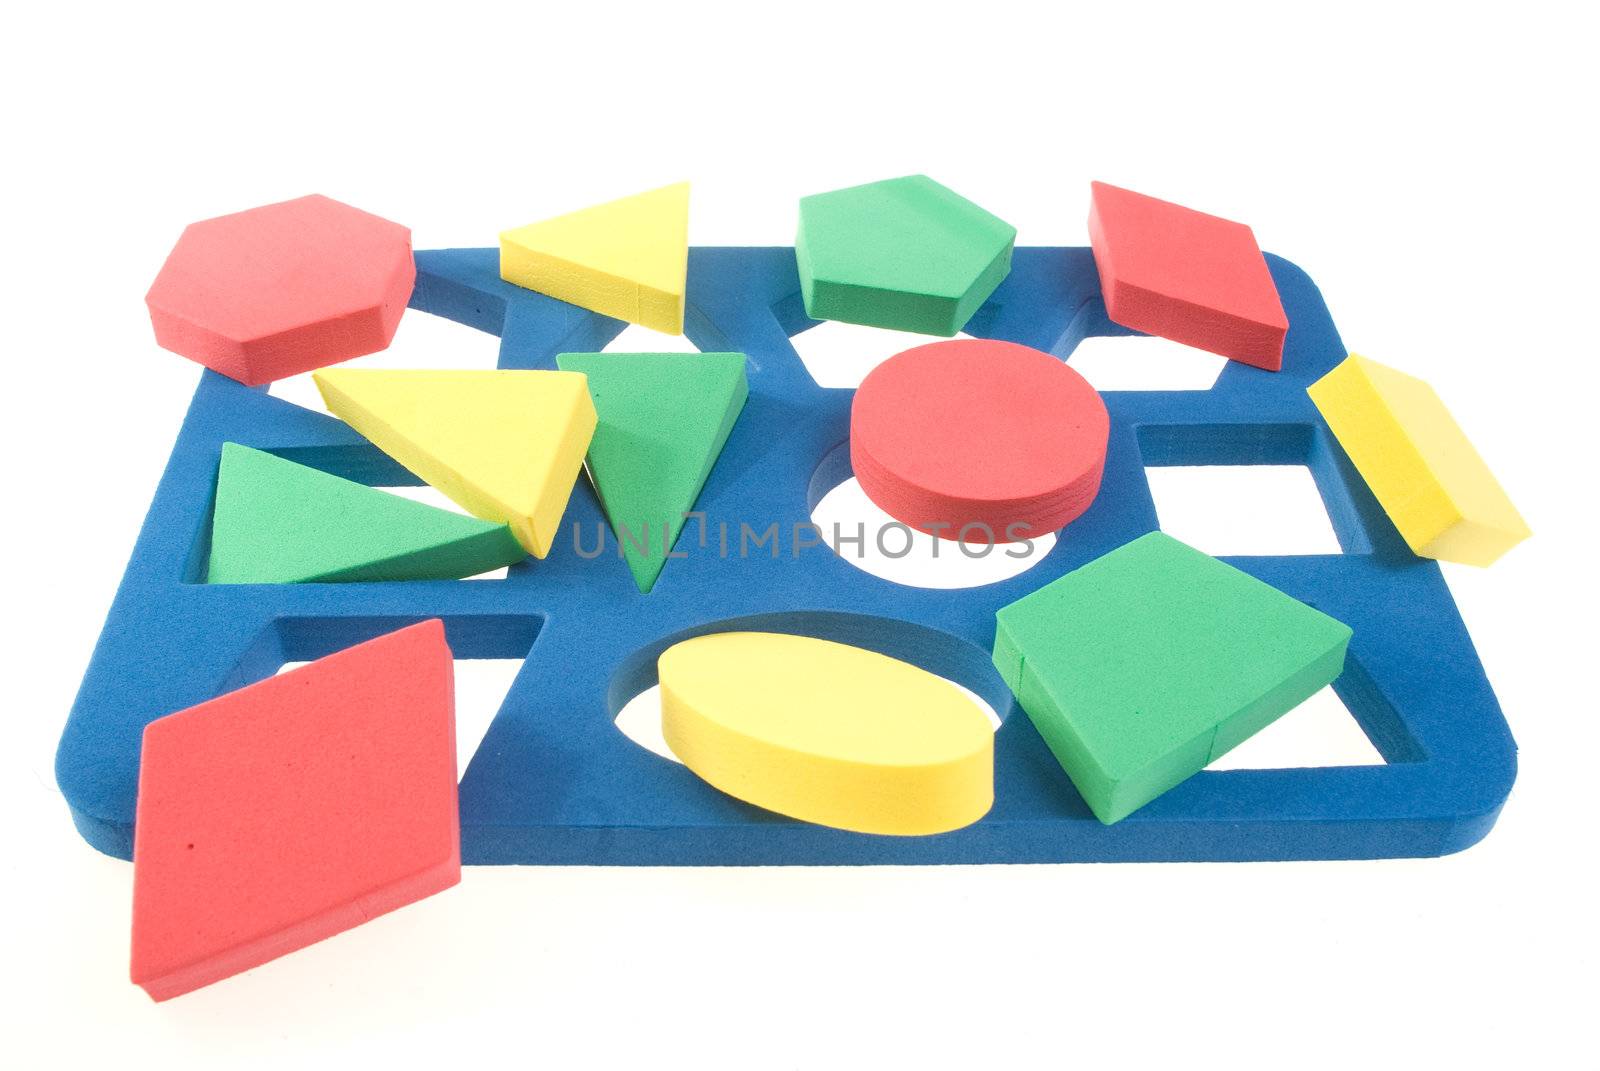 Children's developing game with color geometric shapes